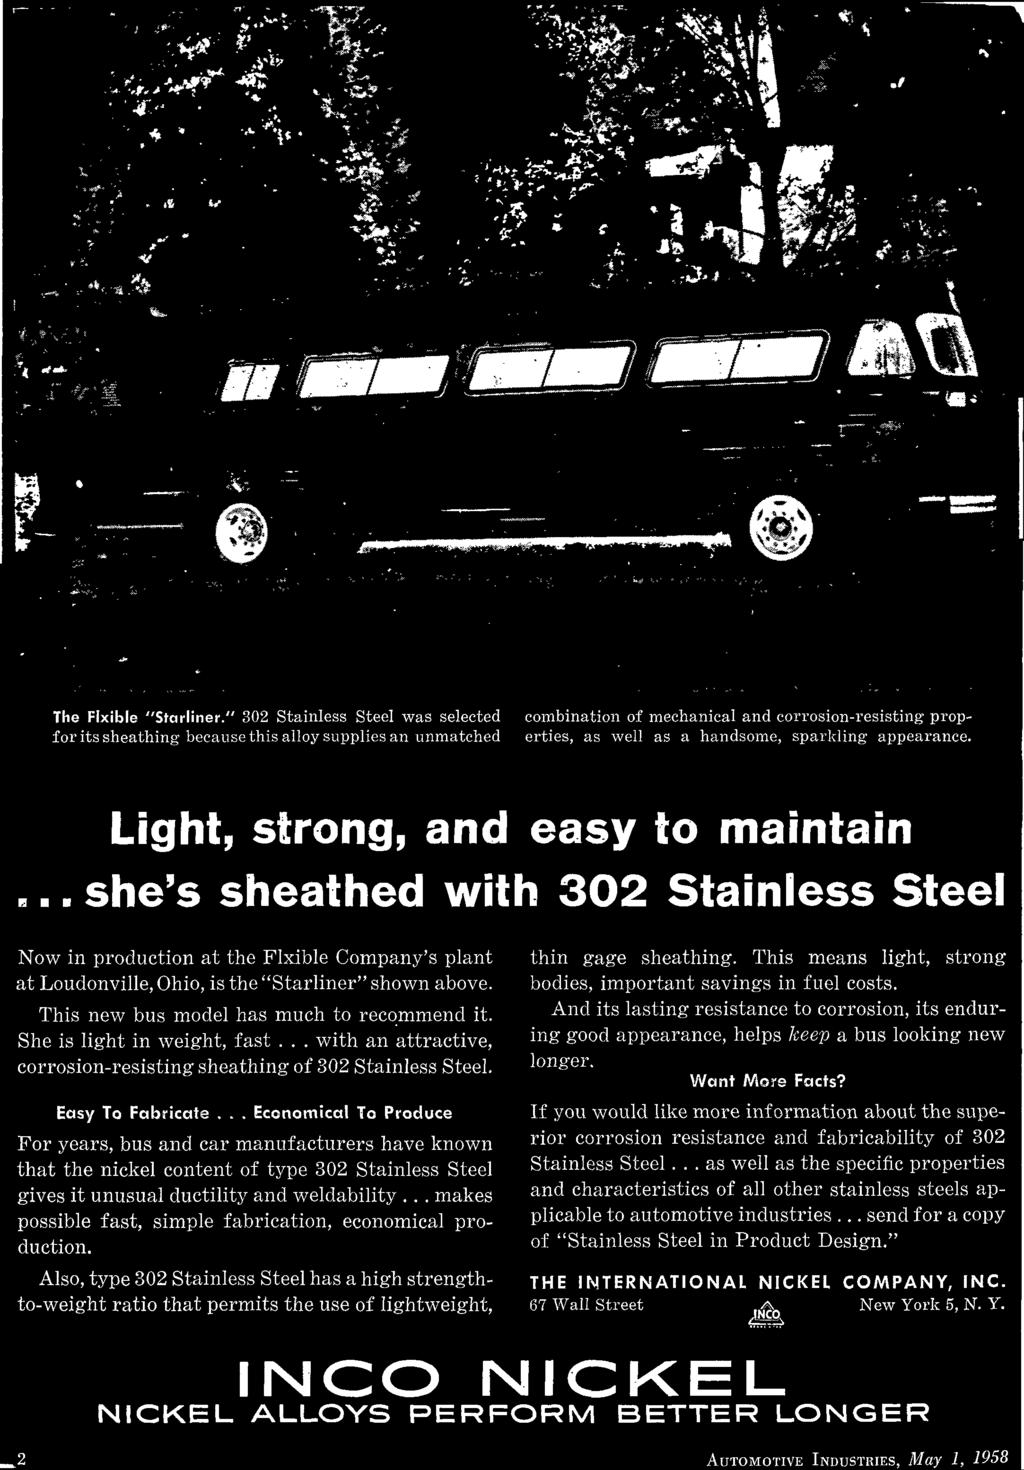 .. she's sheathed with 302 Stainless Steel Now in production at the Flxible Company's plant at Loudonville, Ohio, is the "Starliner" shown above. This new bus model has much to recommend it.